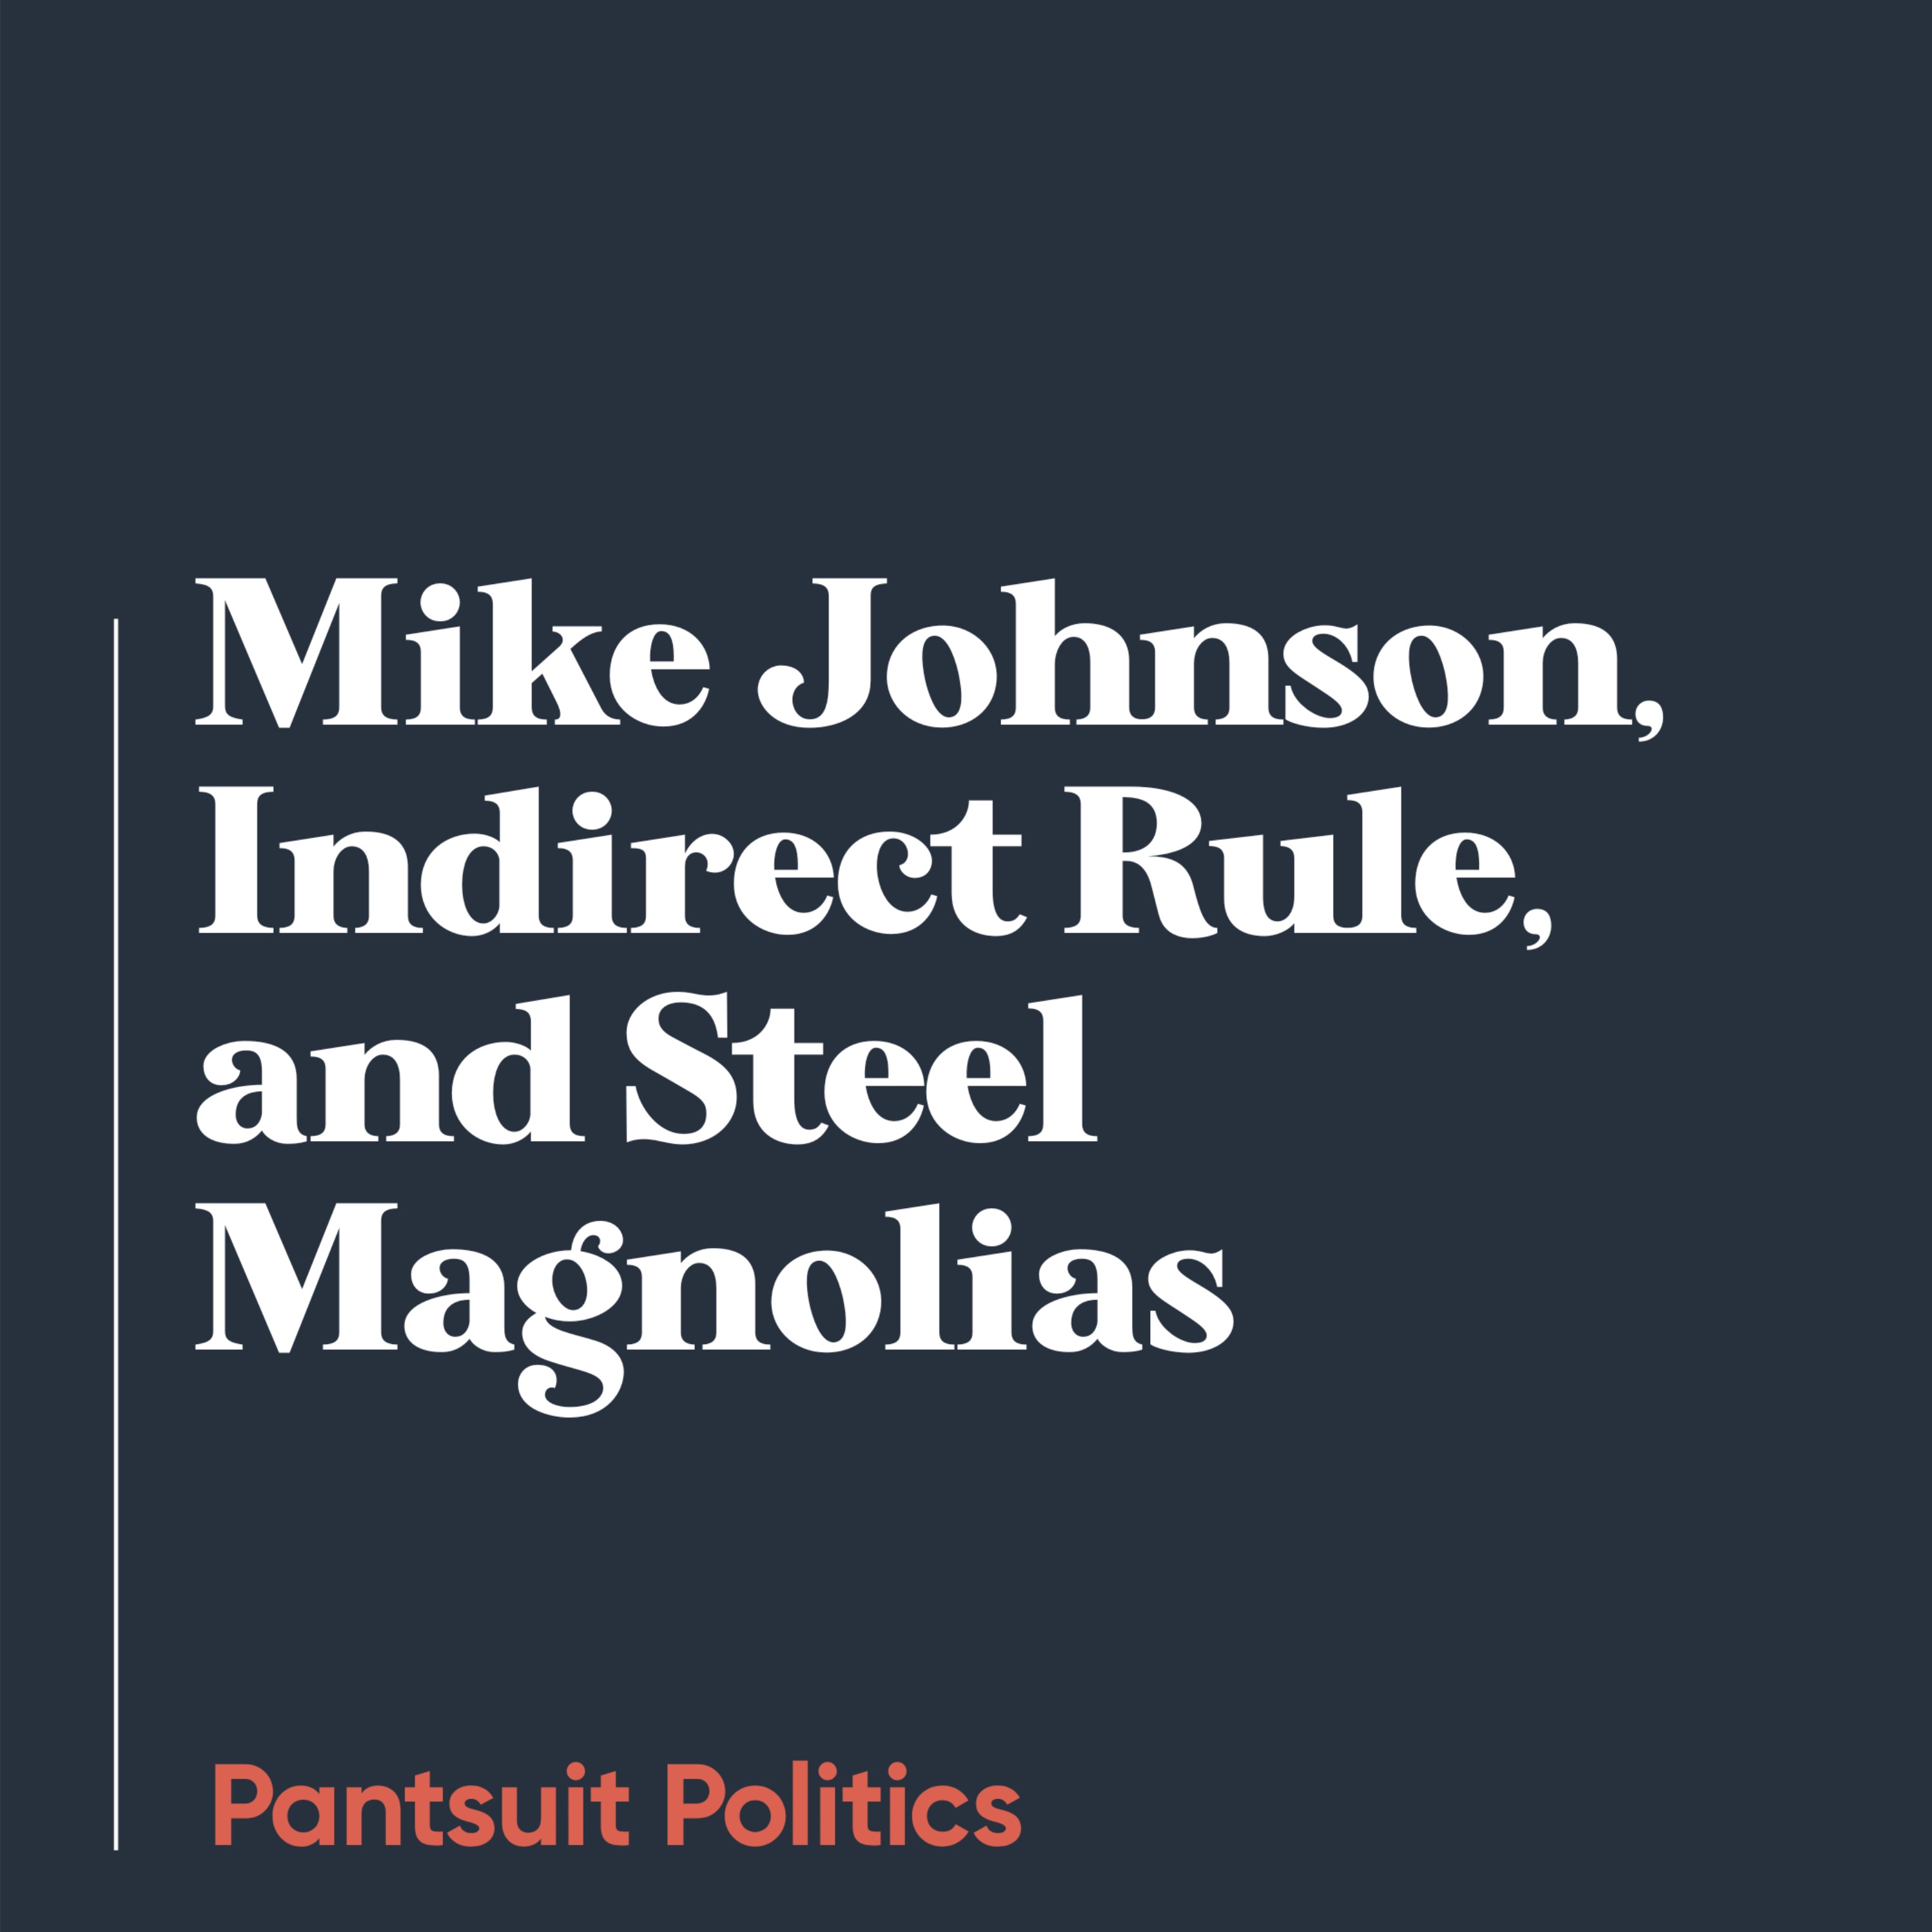 Mike Johnson, Indirect Rule, and Steel Magnolias